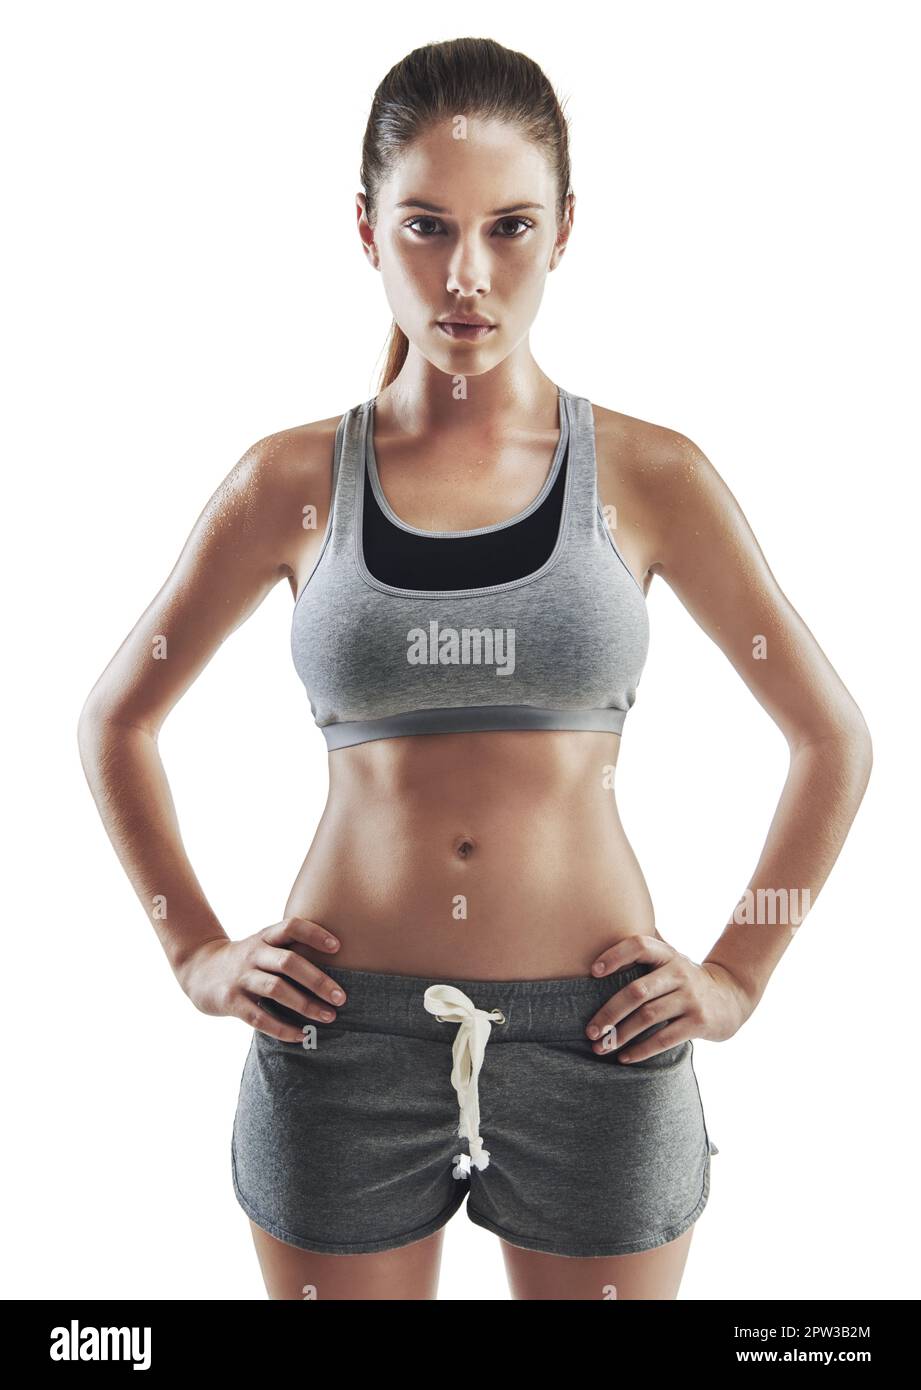 Ill reach my fitness goals. Cropped portrait of a young female